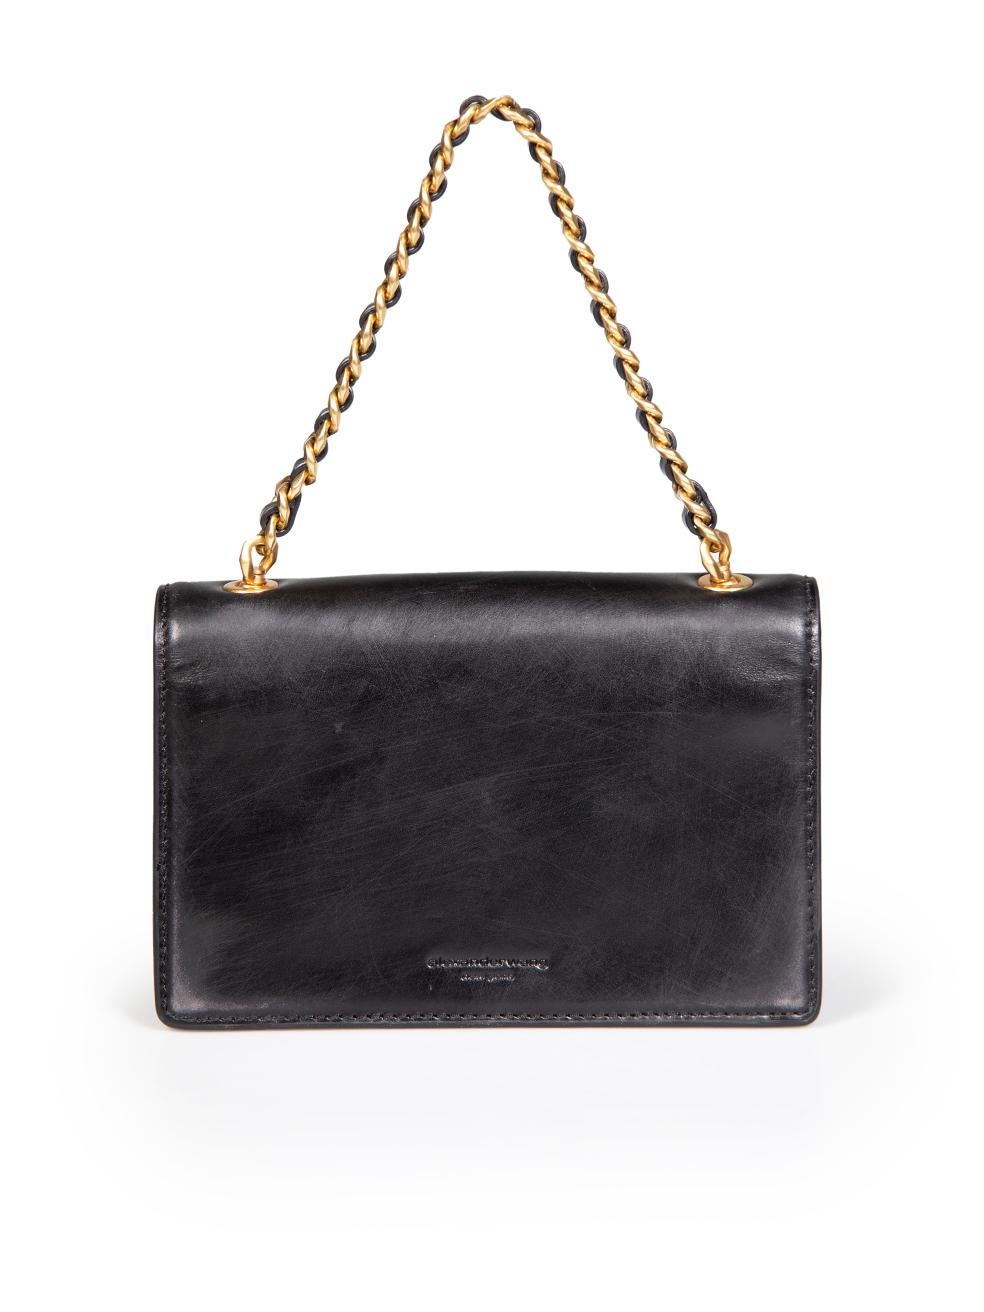 Alexander Wang Black Leather Small Legacy Bag In Good Condition For Sale In London, GB